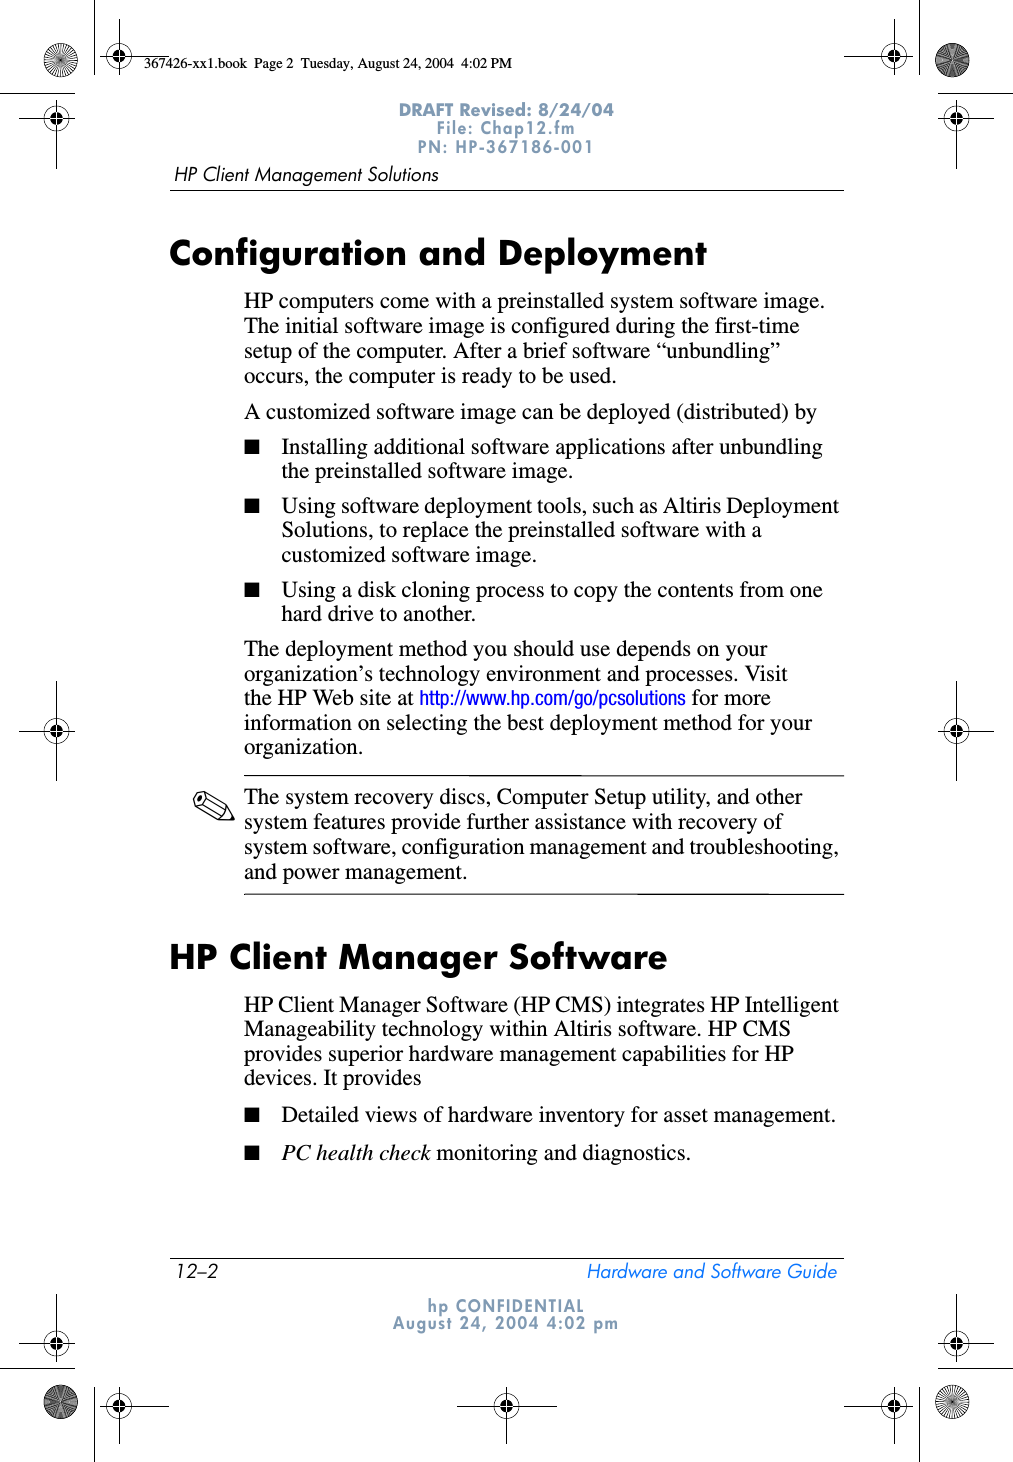 12–2 Hardware and Software GuideHP Client Management SolutionsDRAFT Revised: 8/24/04File: Chap12.fm PN: HP-367186-001 hp CONFIDENTIALAugust 24, 2004 4:02 pmConfiguration and DeploymentHP computers come with a preinstalled system software image. The initial software image is configured during the first-time setup of the computer. After a brief software “unbundling” occurs, the computer is ready to be used.A customized software image can be deployed (distributed) by■Installing additional software applications after unbundling the preinstalled software image.■Using software deployment tools, such as Altiris Deployment Solutions, to replace the preinstalled software with a customized software image.■Using a disk cloning process to copy the contents from one hard drive to another.The deployment method you should use depends on your organization’s technology environment and processes. Visit the HP Web site at http://www.hp.com/go/pcsolutions for more information on selecting the best deployment method for your organization.✎The system recovery discs, Computer Setup utility, and other system features provide further assistance with recovery of system software, configuration management and troubleshooting, and power management.HP Client Manager SoftwareHP Client Manager Software (HP CMS) integrates HP Intelligent Manageability technology within Altiris software. HP CMS provides superior hardware management capabilities for HP devices. It provides■Detailed views of hardware inventory for asset management.■PC health check monitoring and diagnostics.367426-xx1.book  Page 2  Tuesday, August 24, 2004  4:02 PM